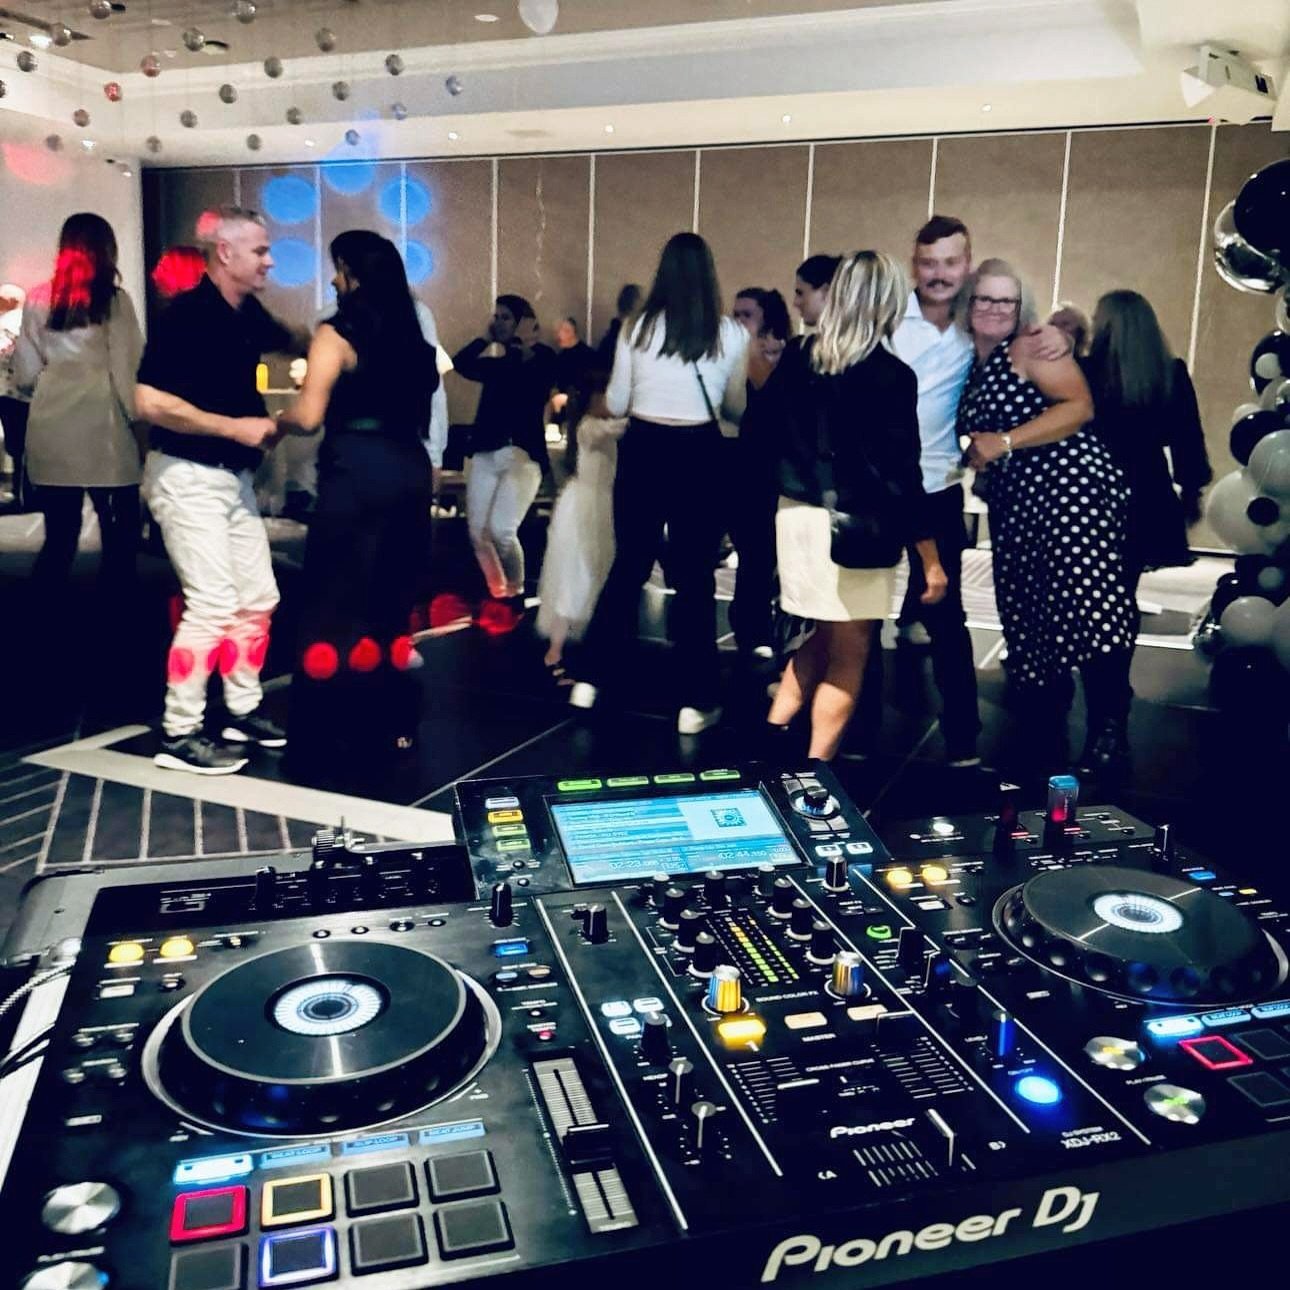 Was great to be apart of Alan&rsquo;s 60th Birthday organised by his wife Michelle. Thanks for having us, it was a great event. 

Well done Michelle and Happy Birthday Alan 🥳
#happybirthday #mypartyentertainment